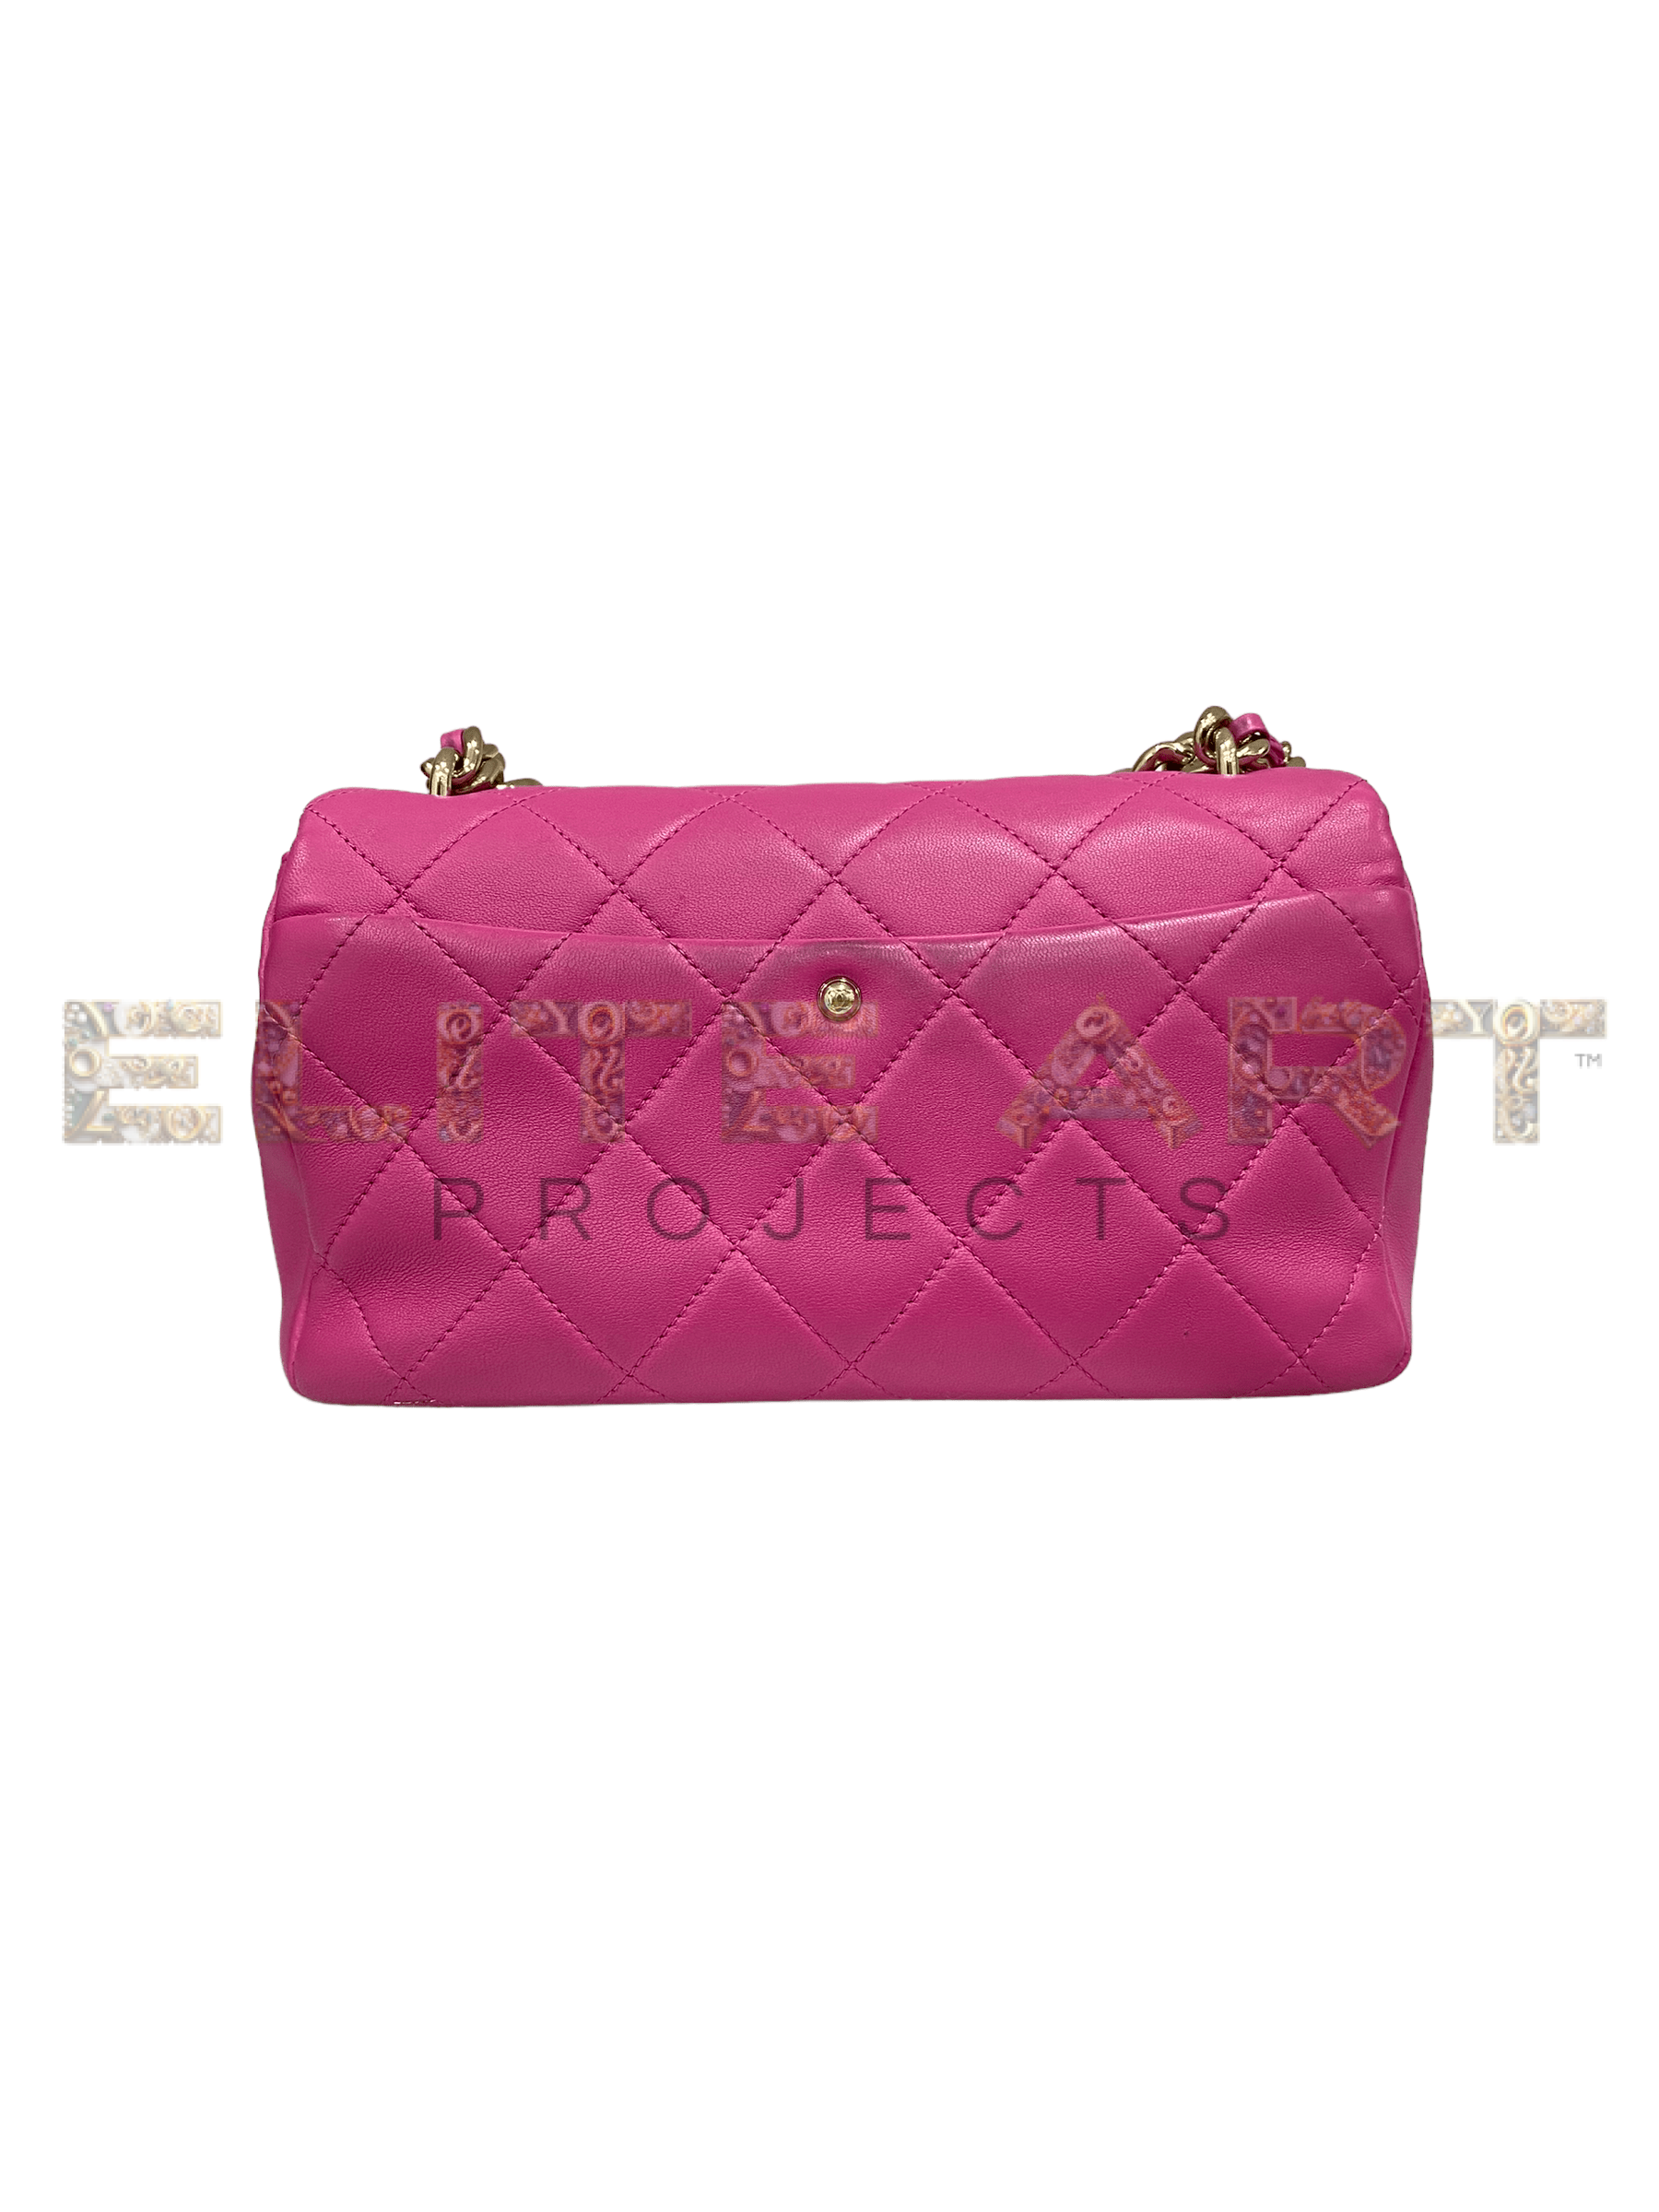 ELS Fashion TV, Elite Art Projects, Chanel, 19 bag, smooth pink leather, gold-tone hardware, CC logo clasp, grey fabric lining, spacious interior, central chain handle, leather and chain intertwined shoulder strap, 2021/22, original card, good condition, slight signs on leather